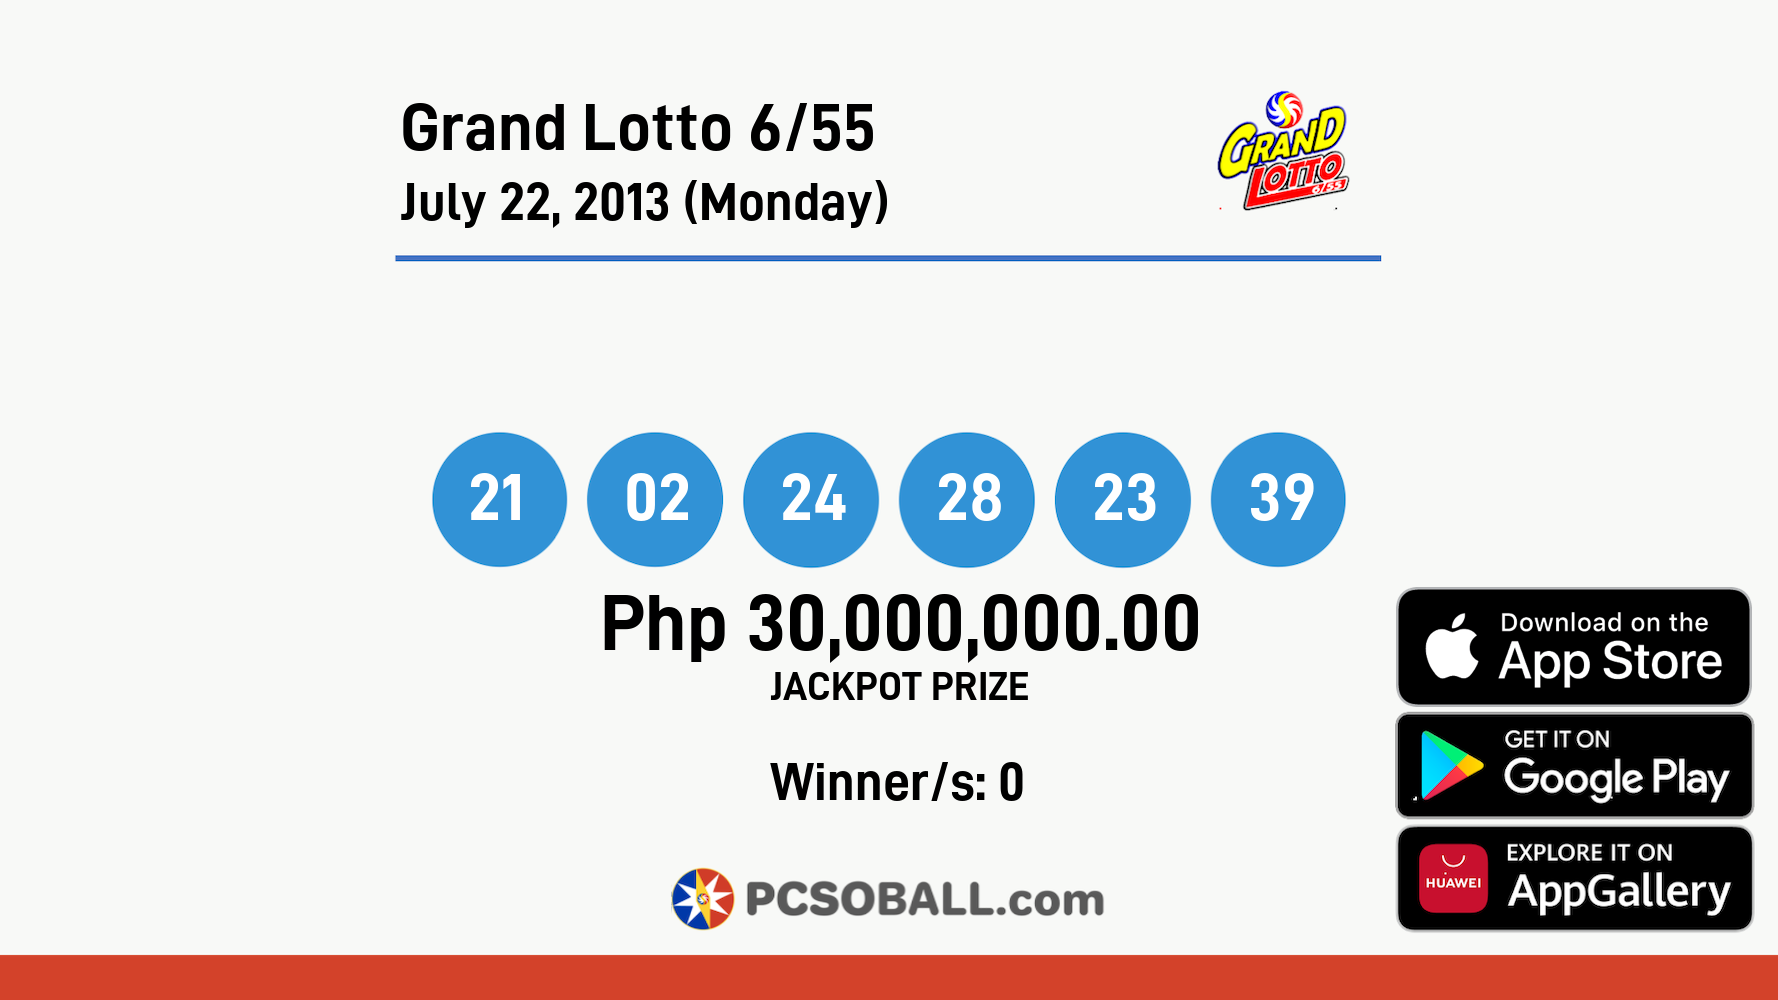 Grand Lotto 6/55 July 22, 2013 (Monday) Result